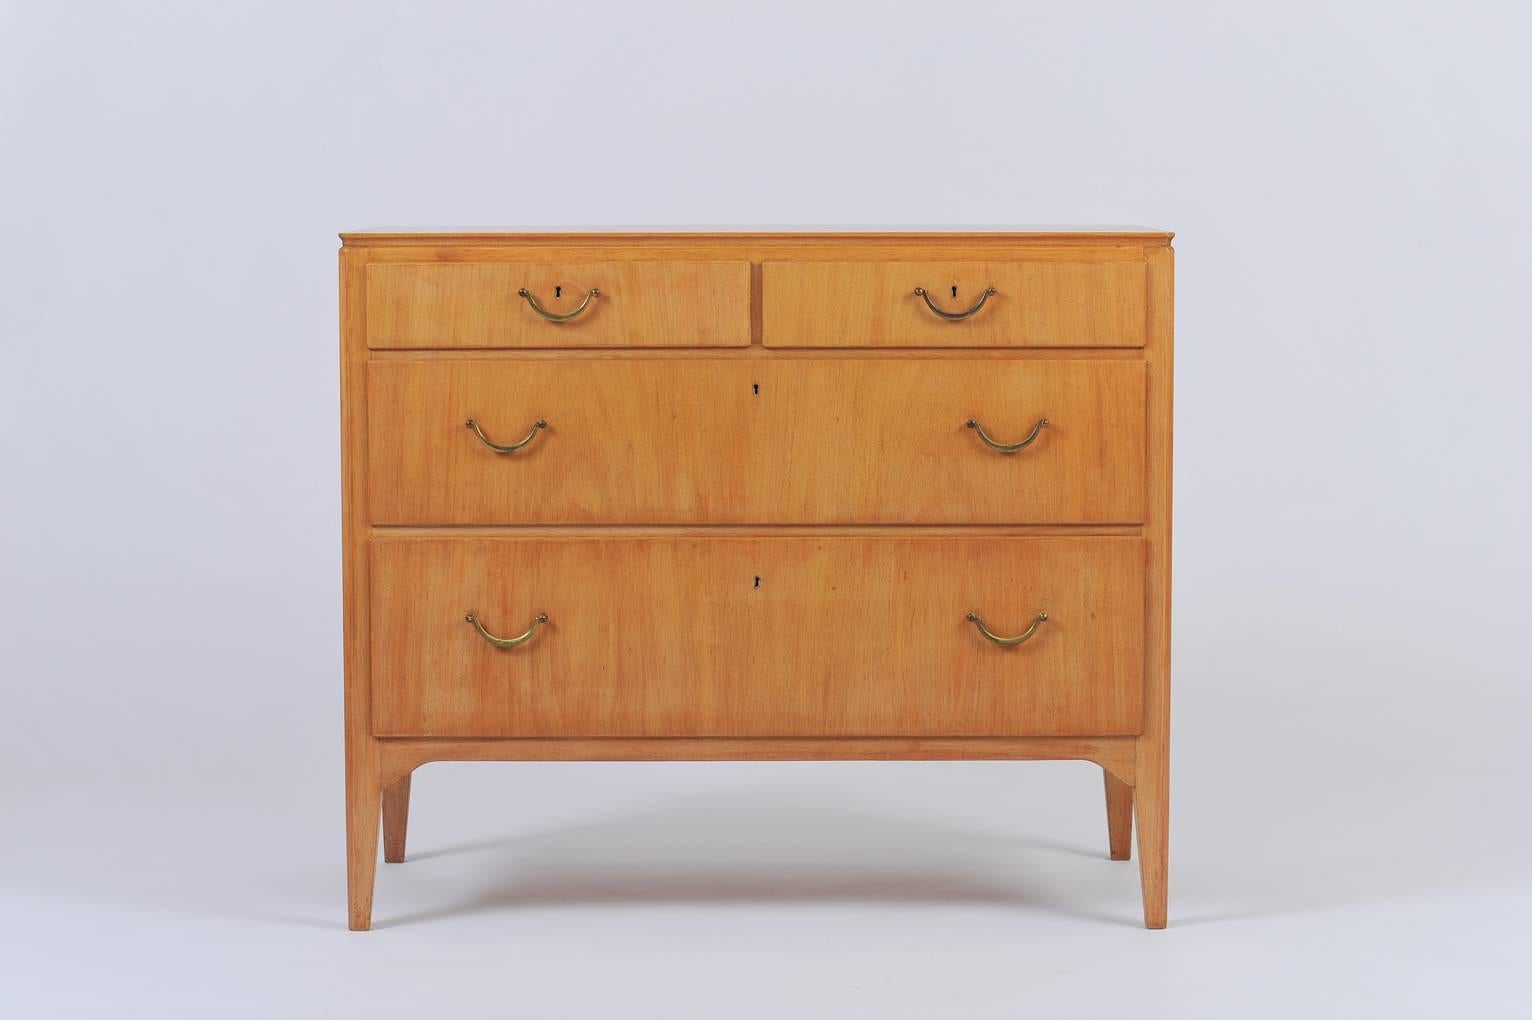 A four-drawer chest by David Rosén for Nordiska Kompaniet of Stockholm, Sweden.
Each drawer with a brass handle and brass key hole.
Bearing the original maker's stamped brass label with inventory number and dated 1946.
Key in working order